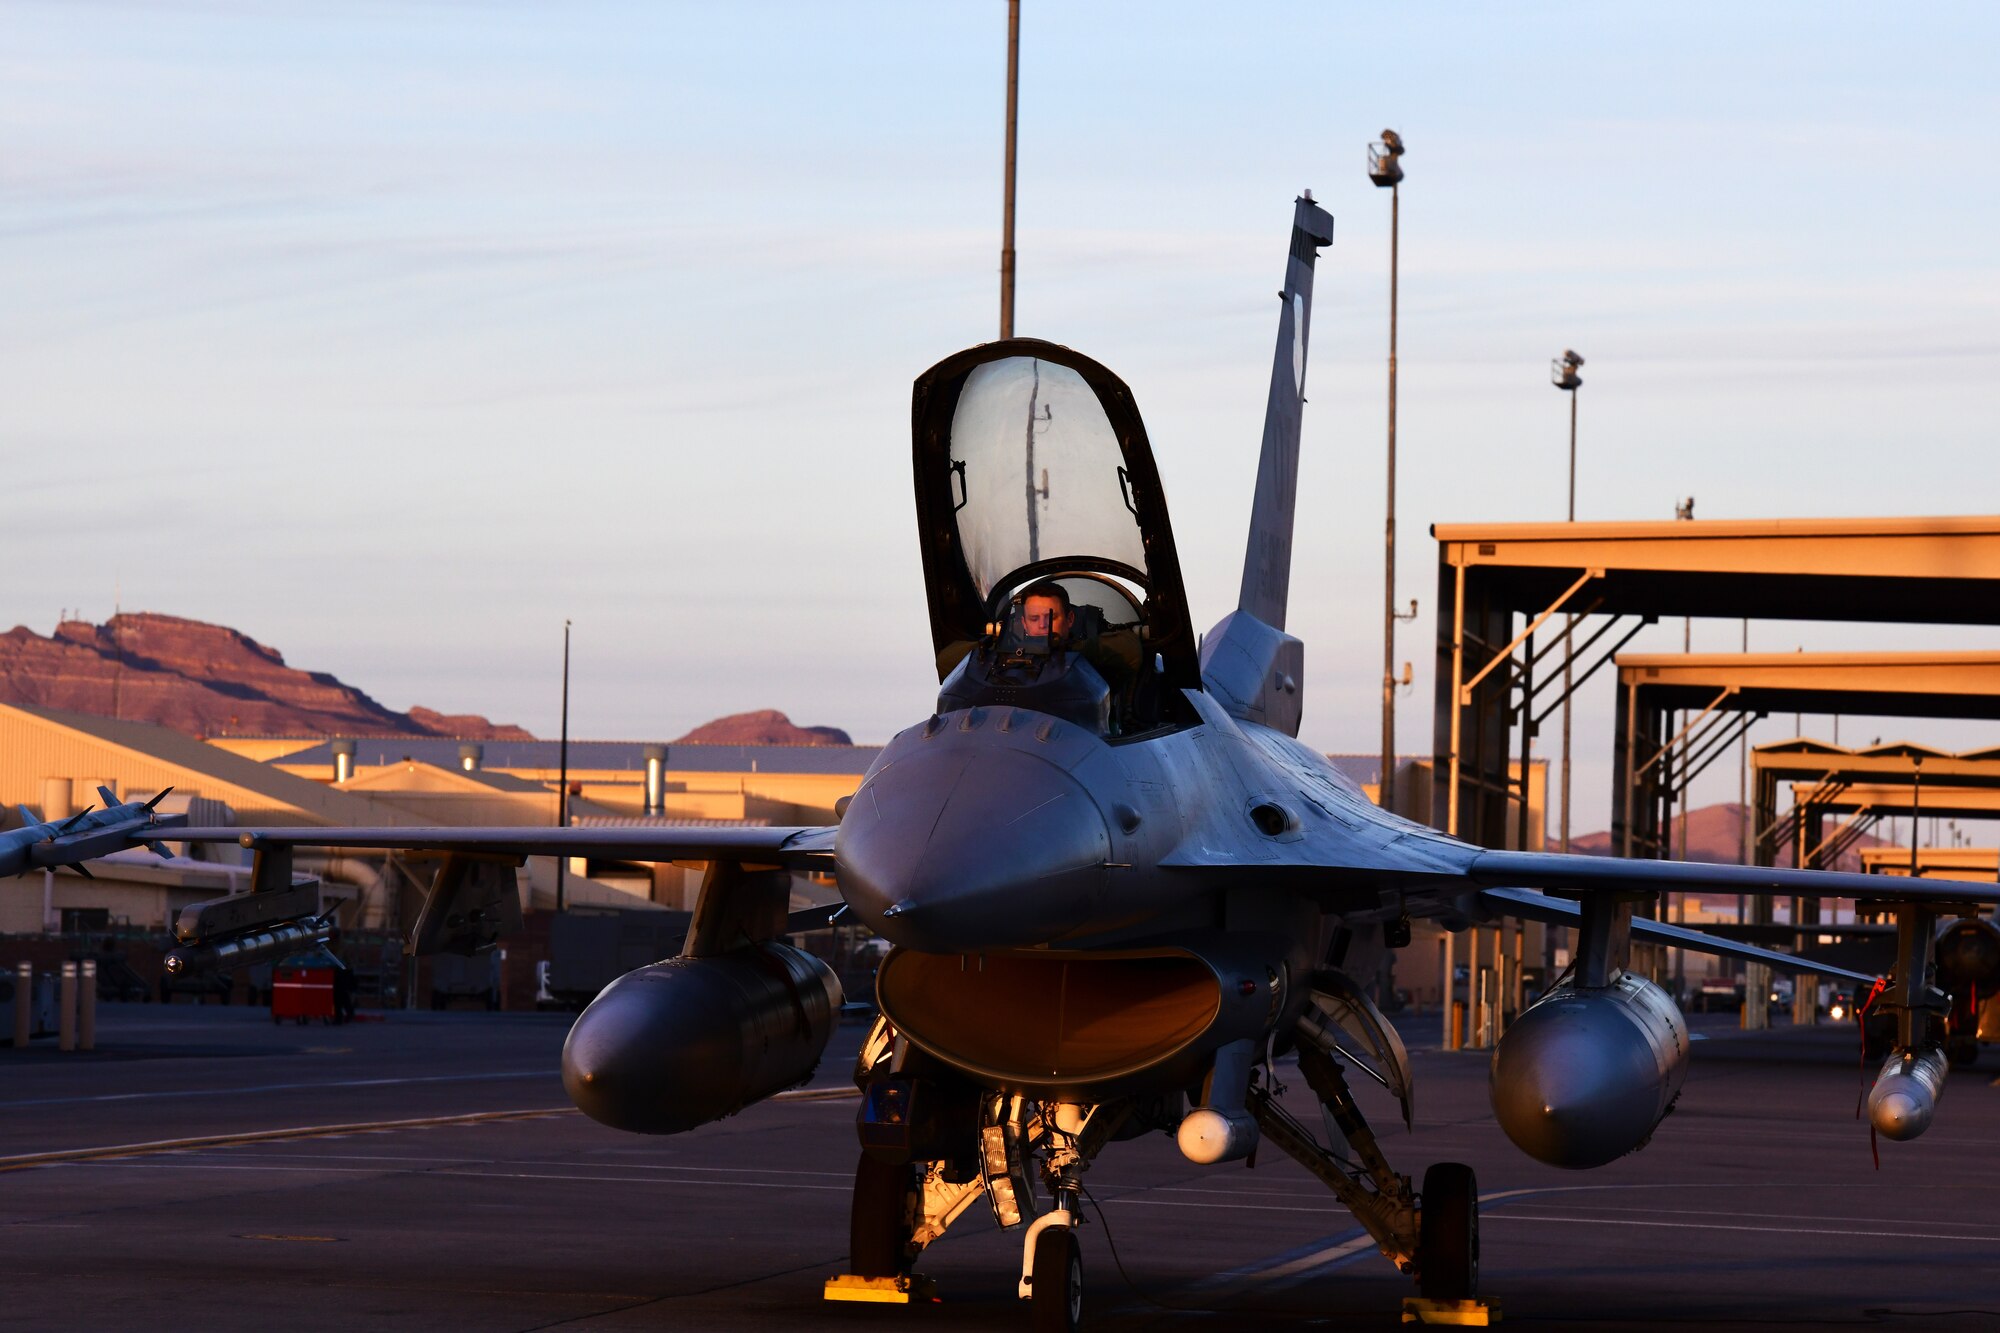 Lt. Col. Stephen Graham, 84th TES electronic warfare test director, prepares for flight to conduct Force Development Evaluations of multiple systems on the F-16, Dec. 15, Nellis Air Force Base, Nev. (U.S. Air Force Photo by Staff Sgt. Paige Yenke)